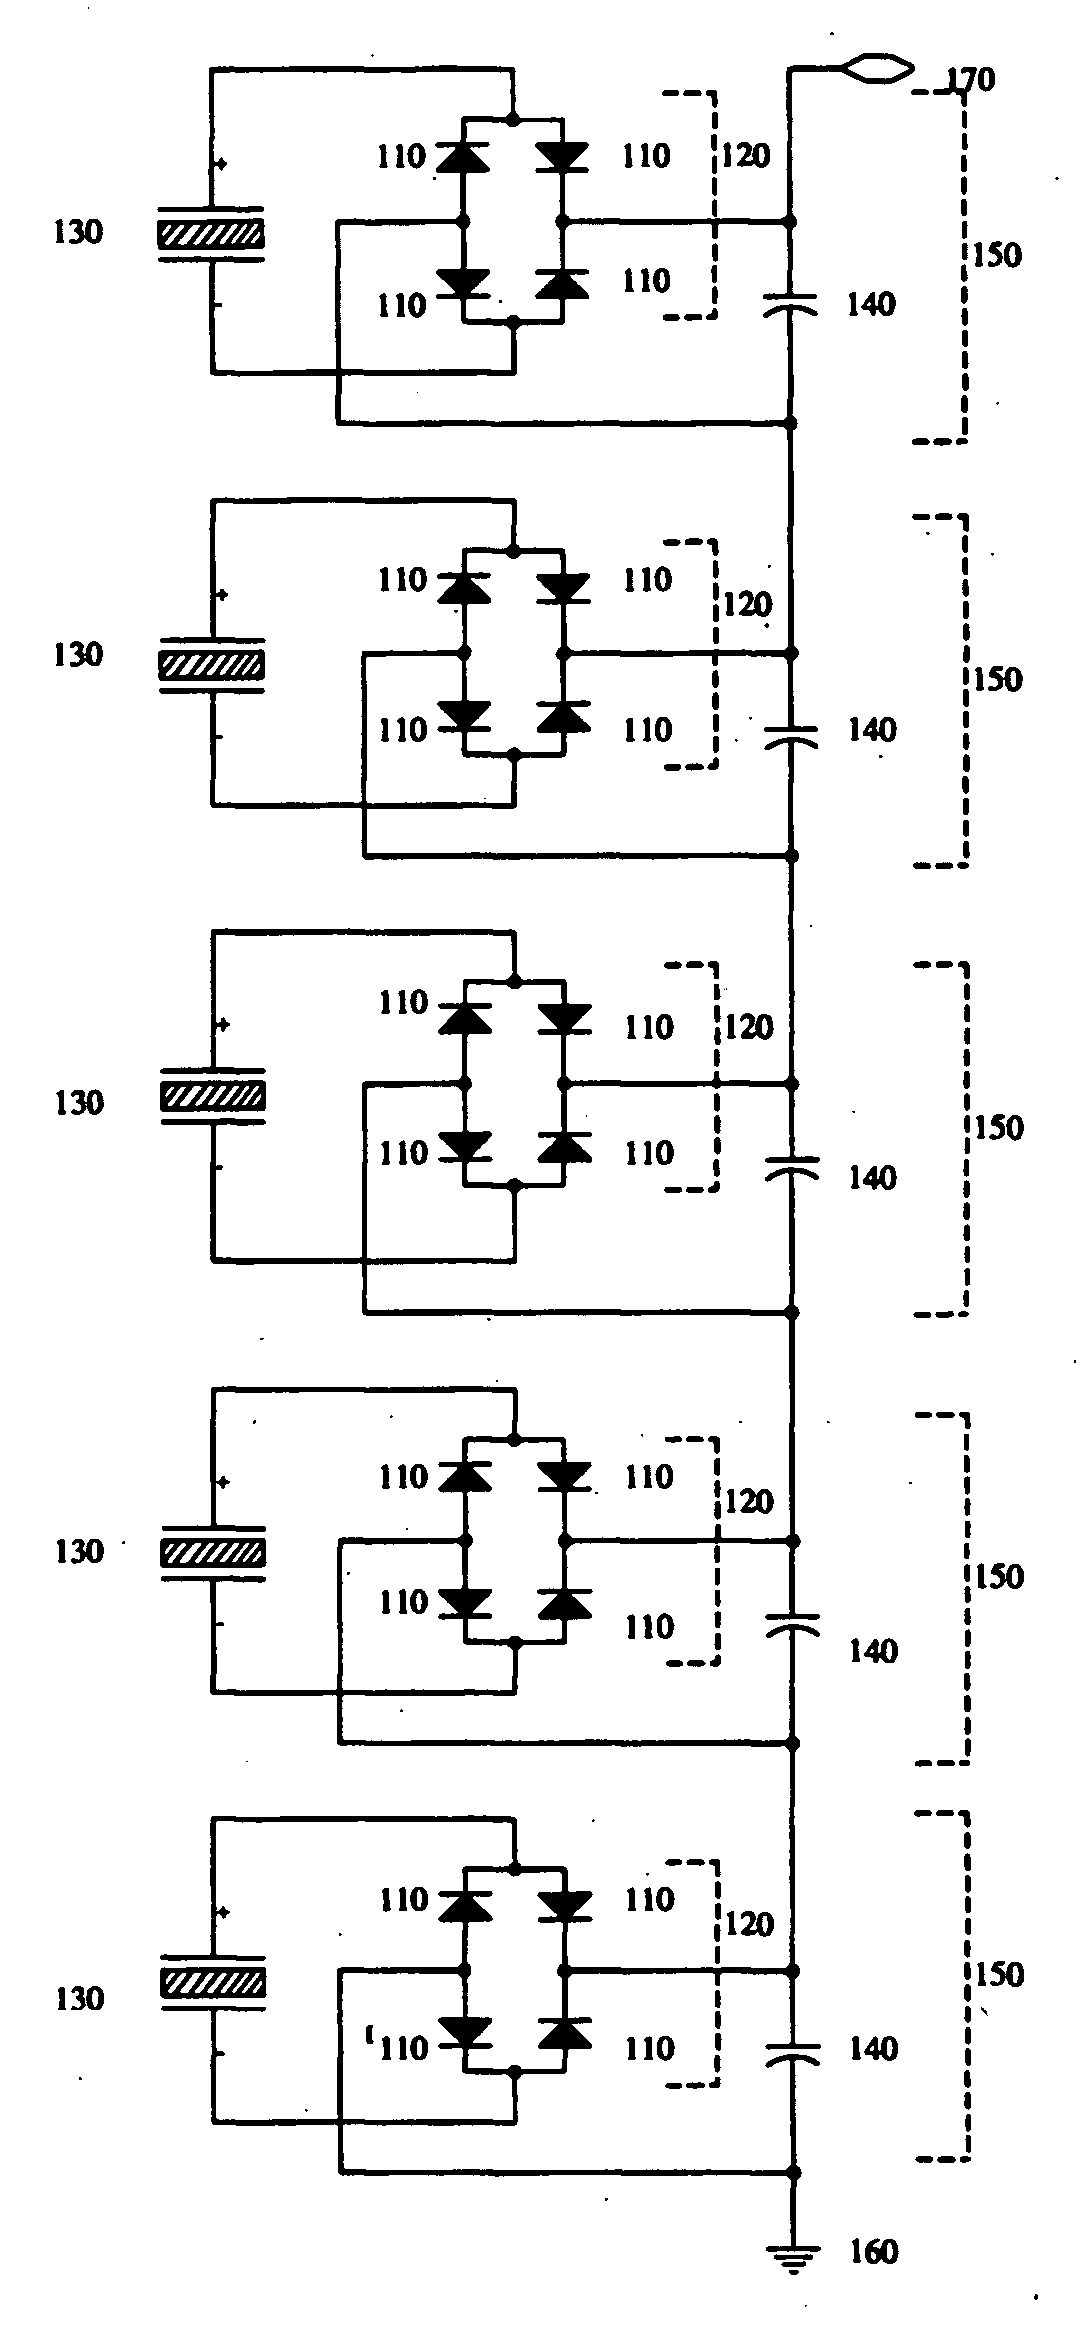 Method and apparatus for a high output sensor system